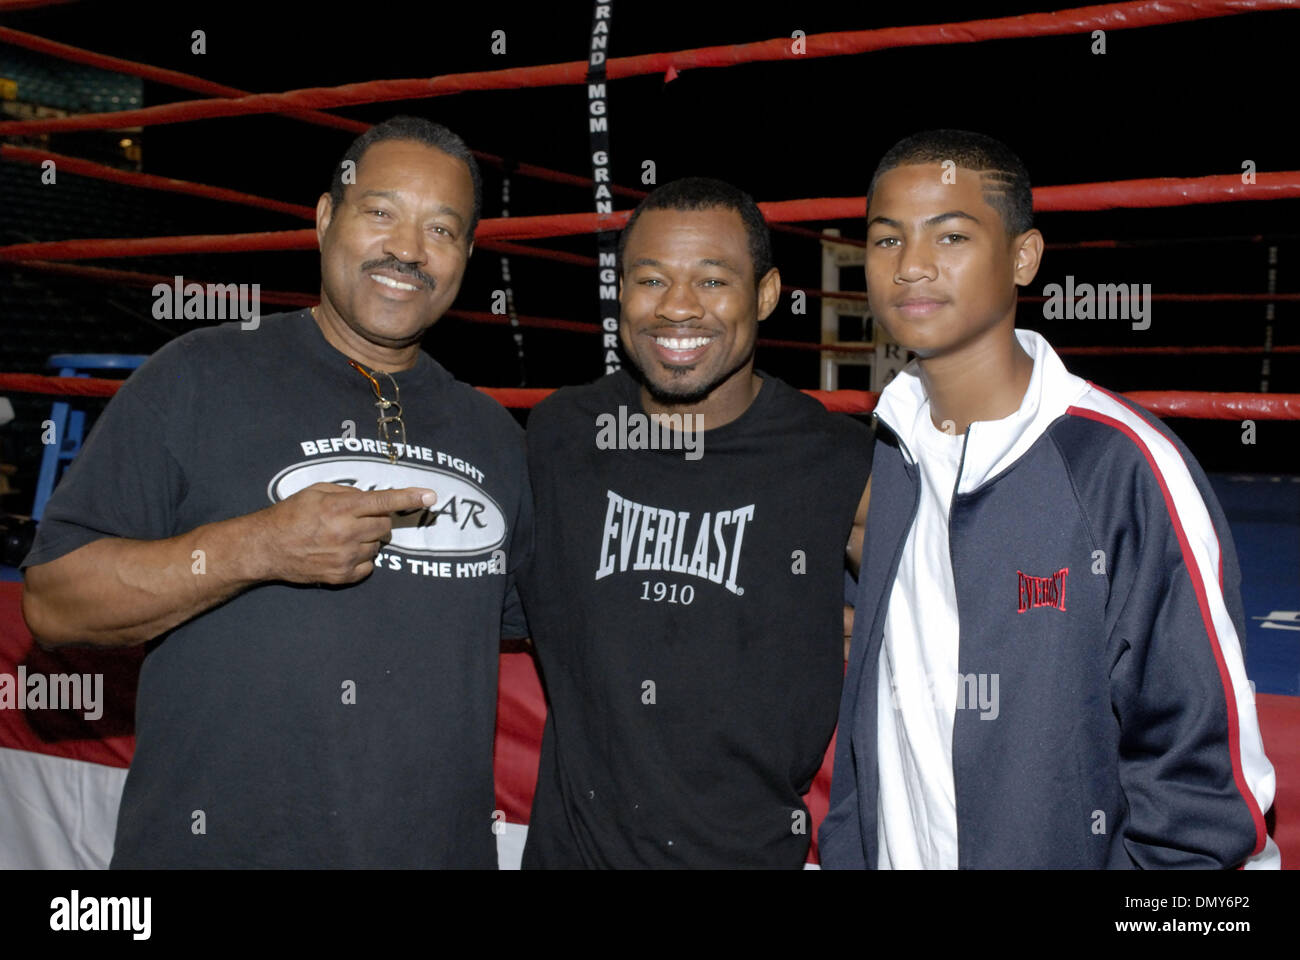 Jack mosley and shane mosley hi-res stock photography and images